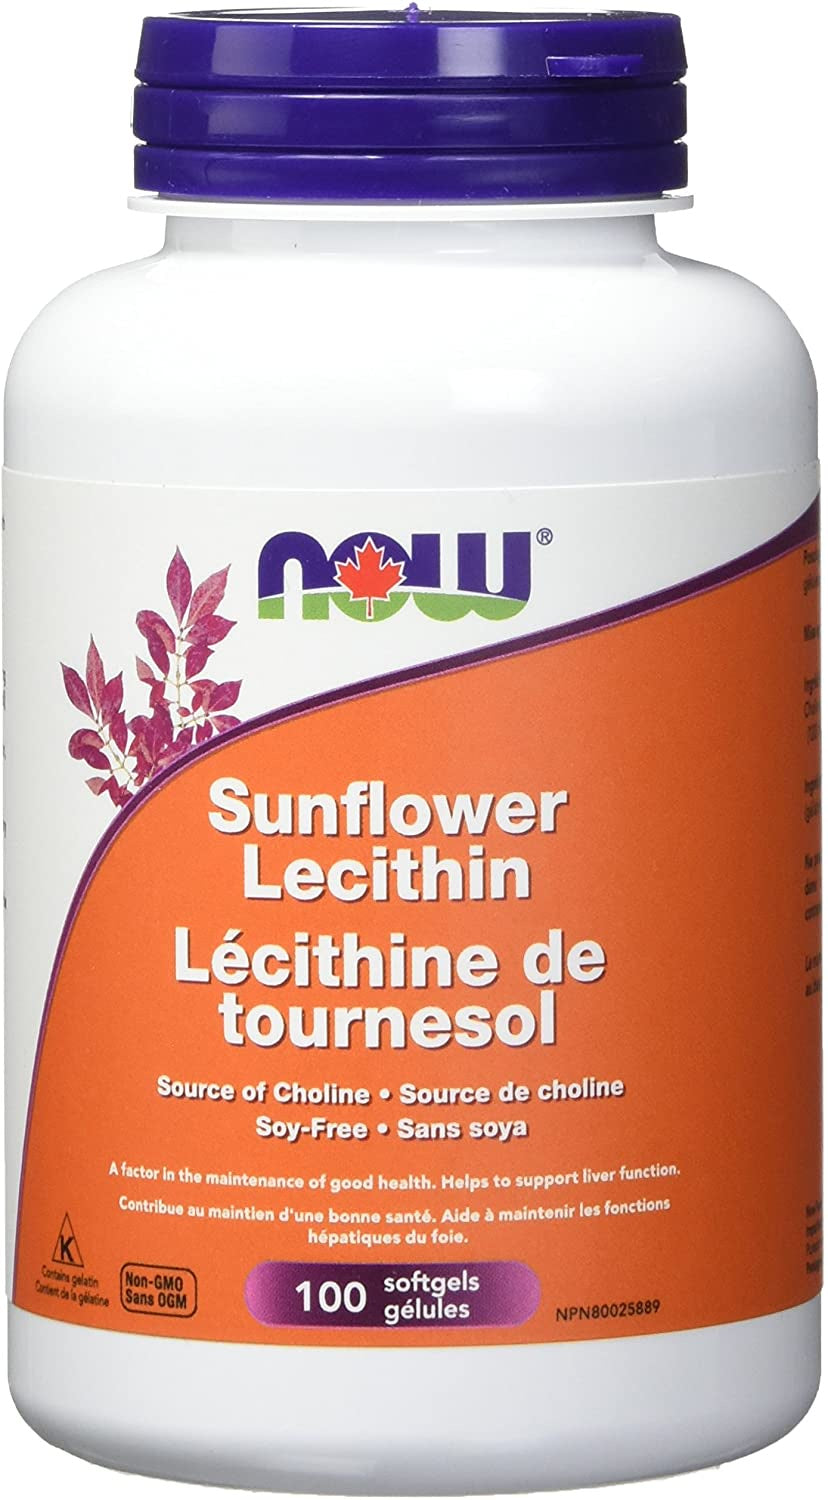 Now- Sunflower Lecithin 1200mg (100 softgels)